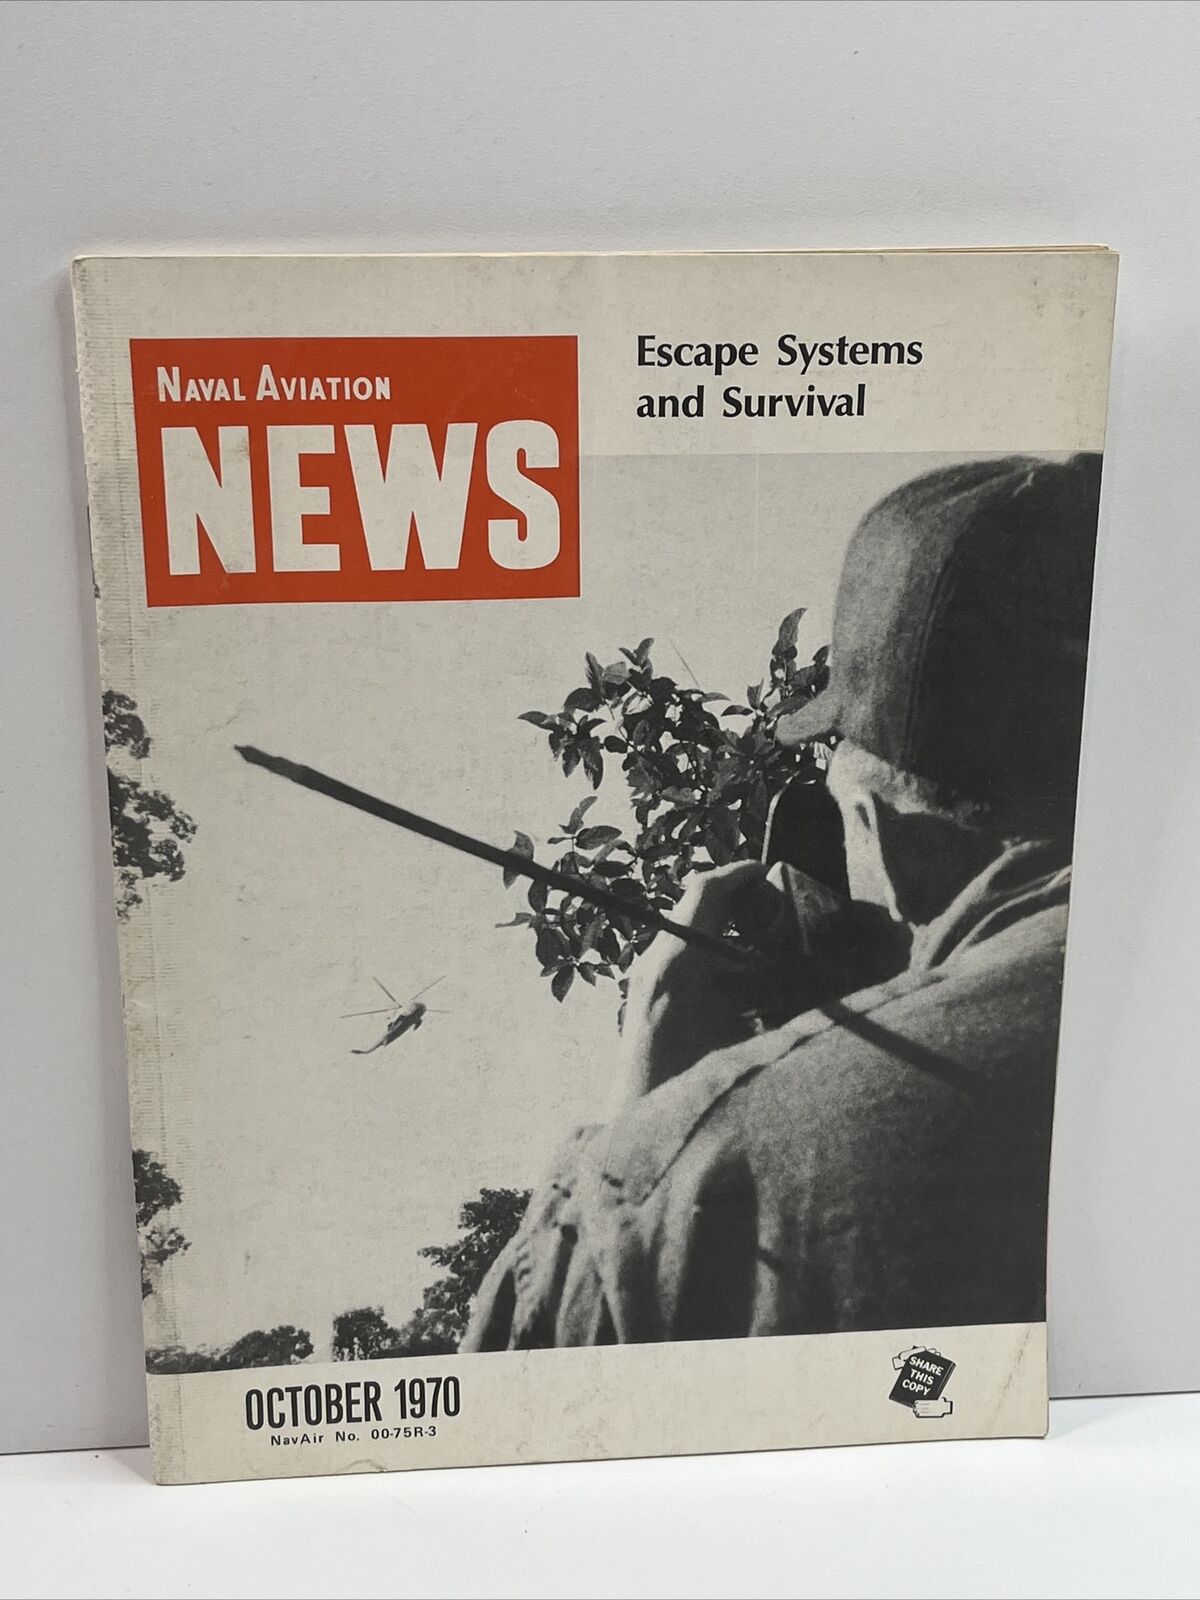 NAVAIR Naval Aviation News Magazine October 1970 Escape Systems and Survival